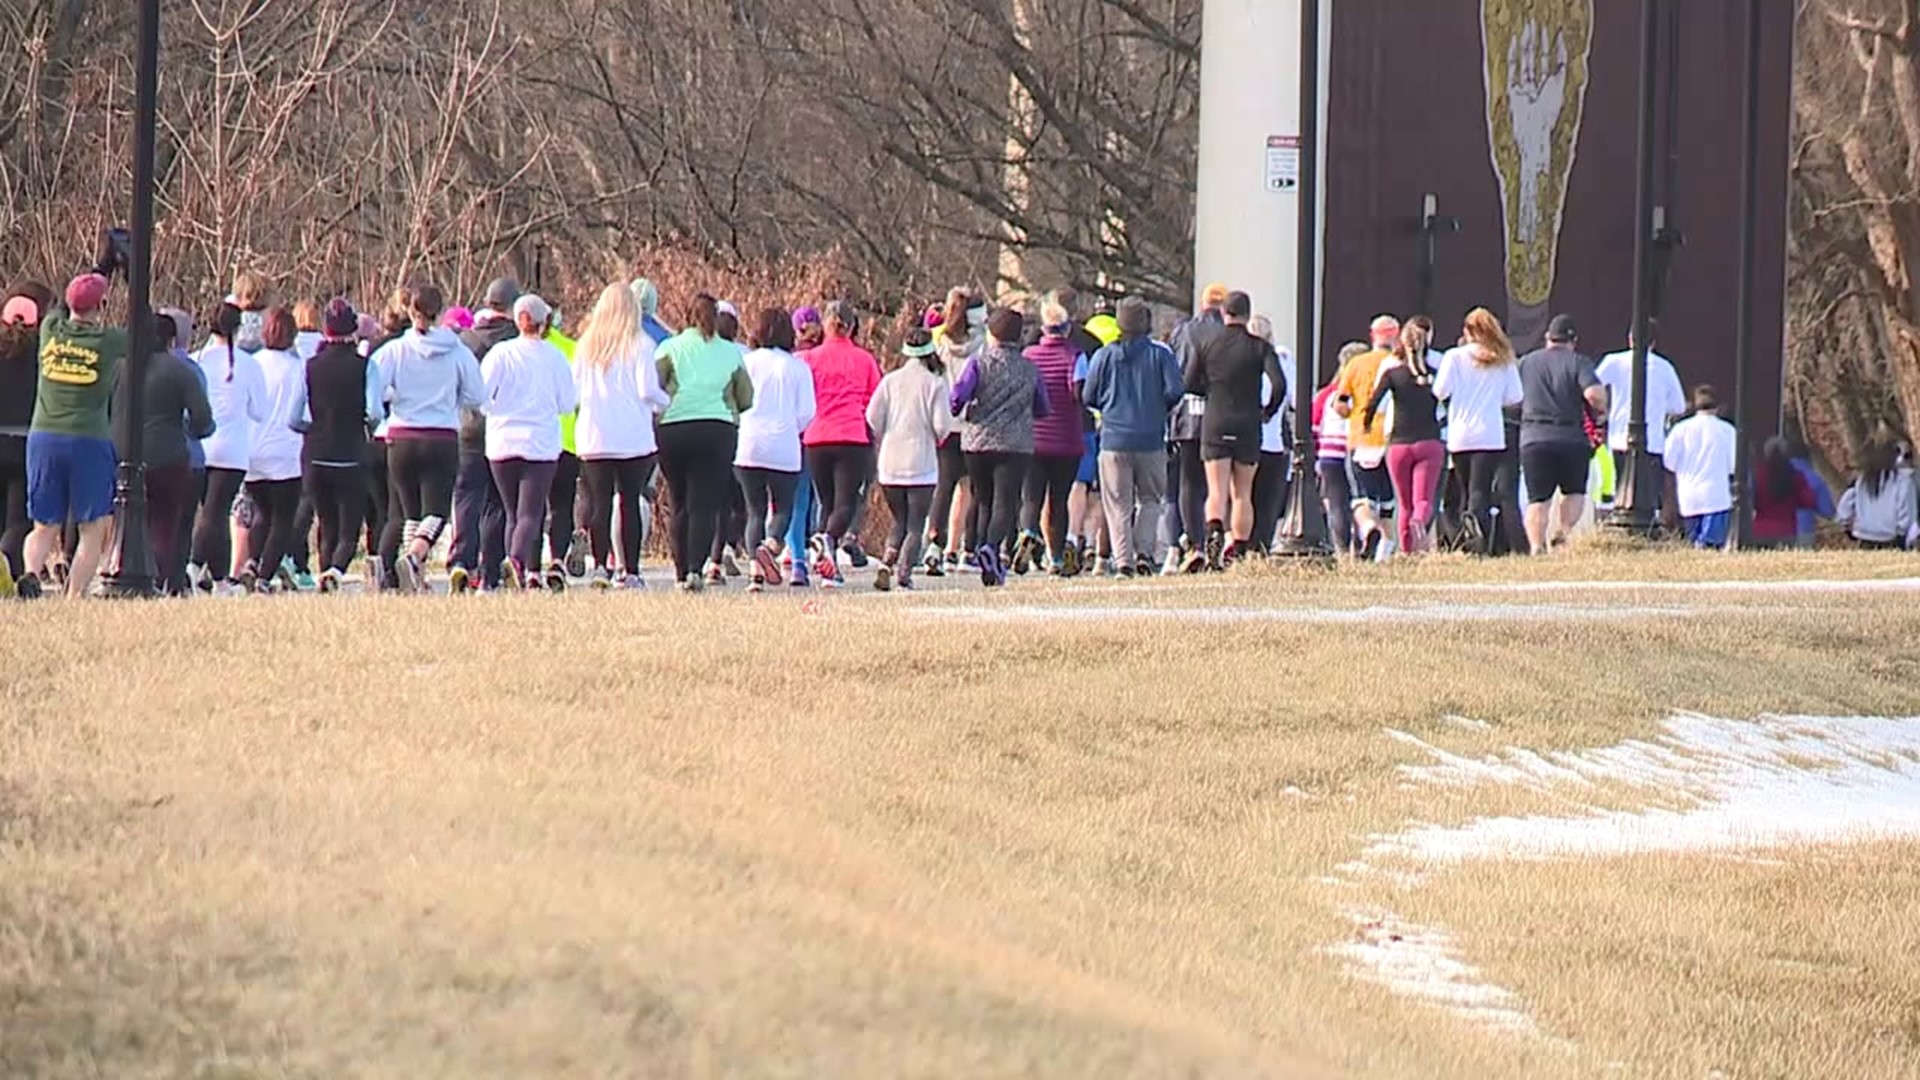 Runners "shivered by the river" Saturday morning on the Lackawanna Heritage Trail in Scranton.